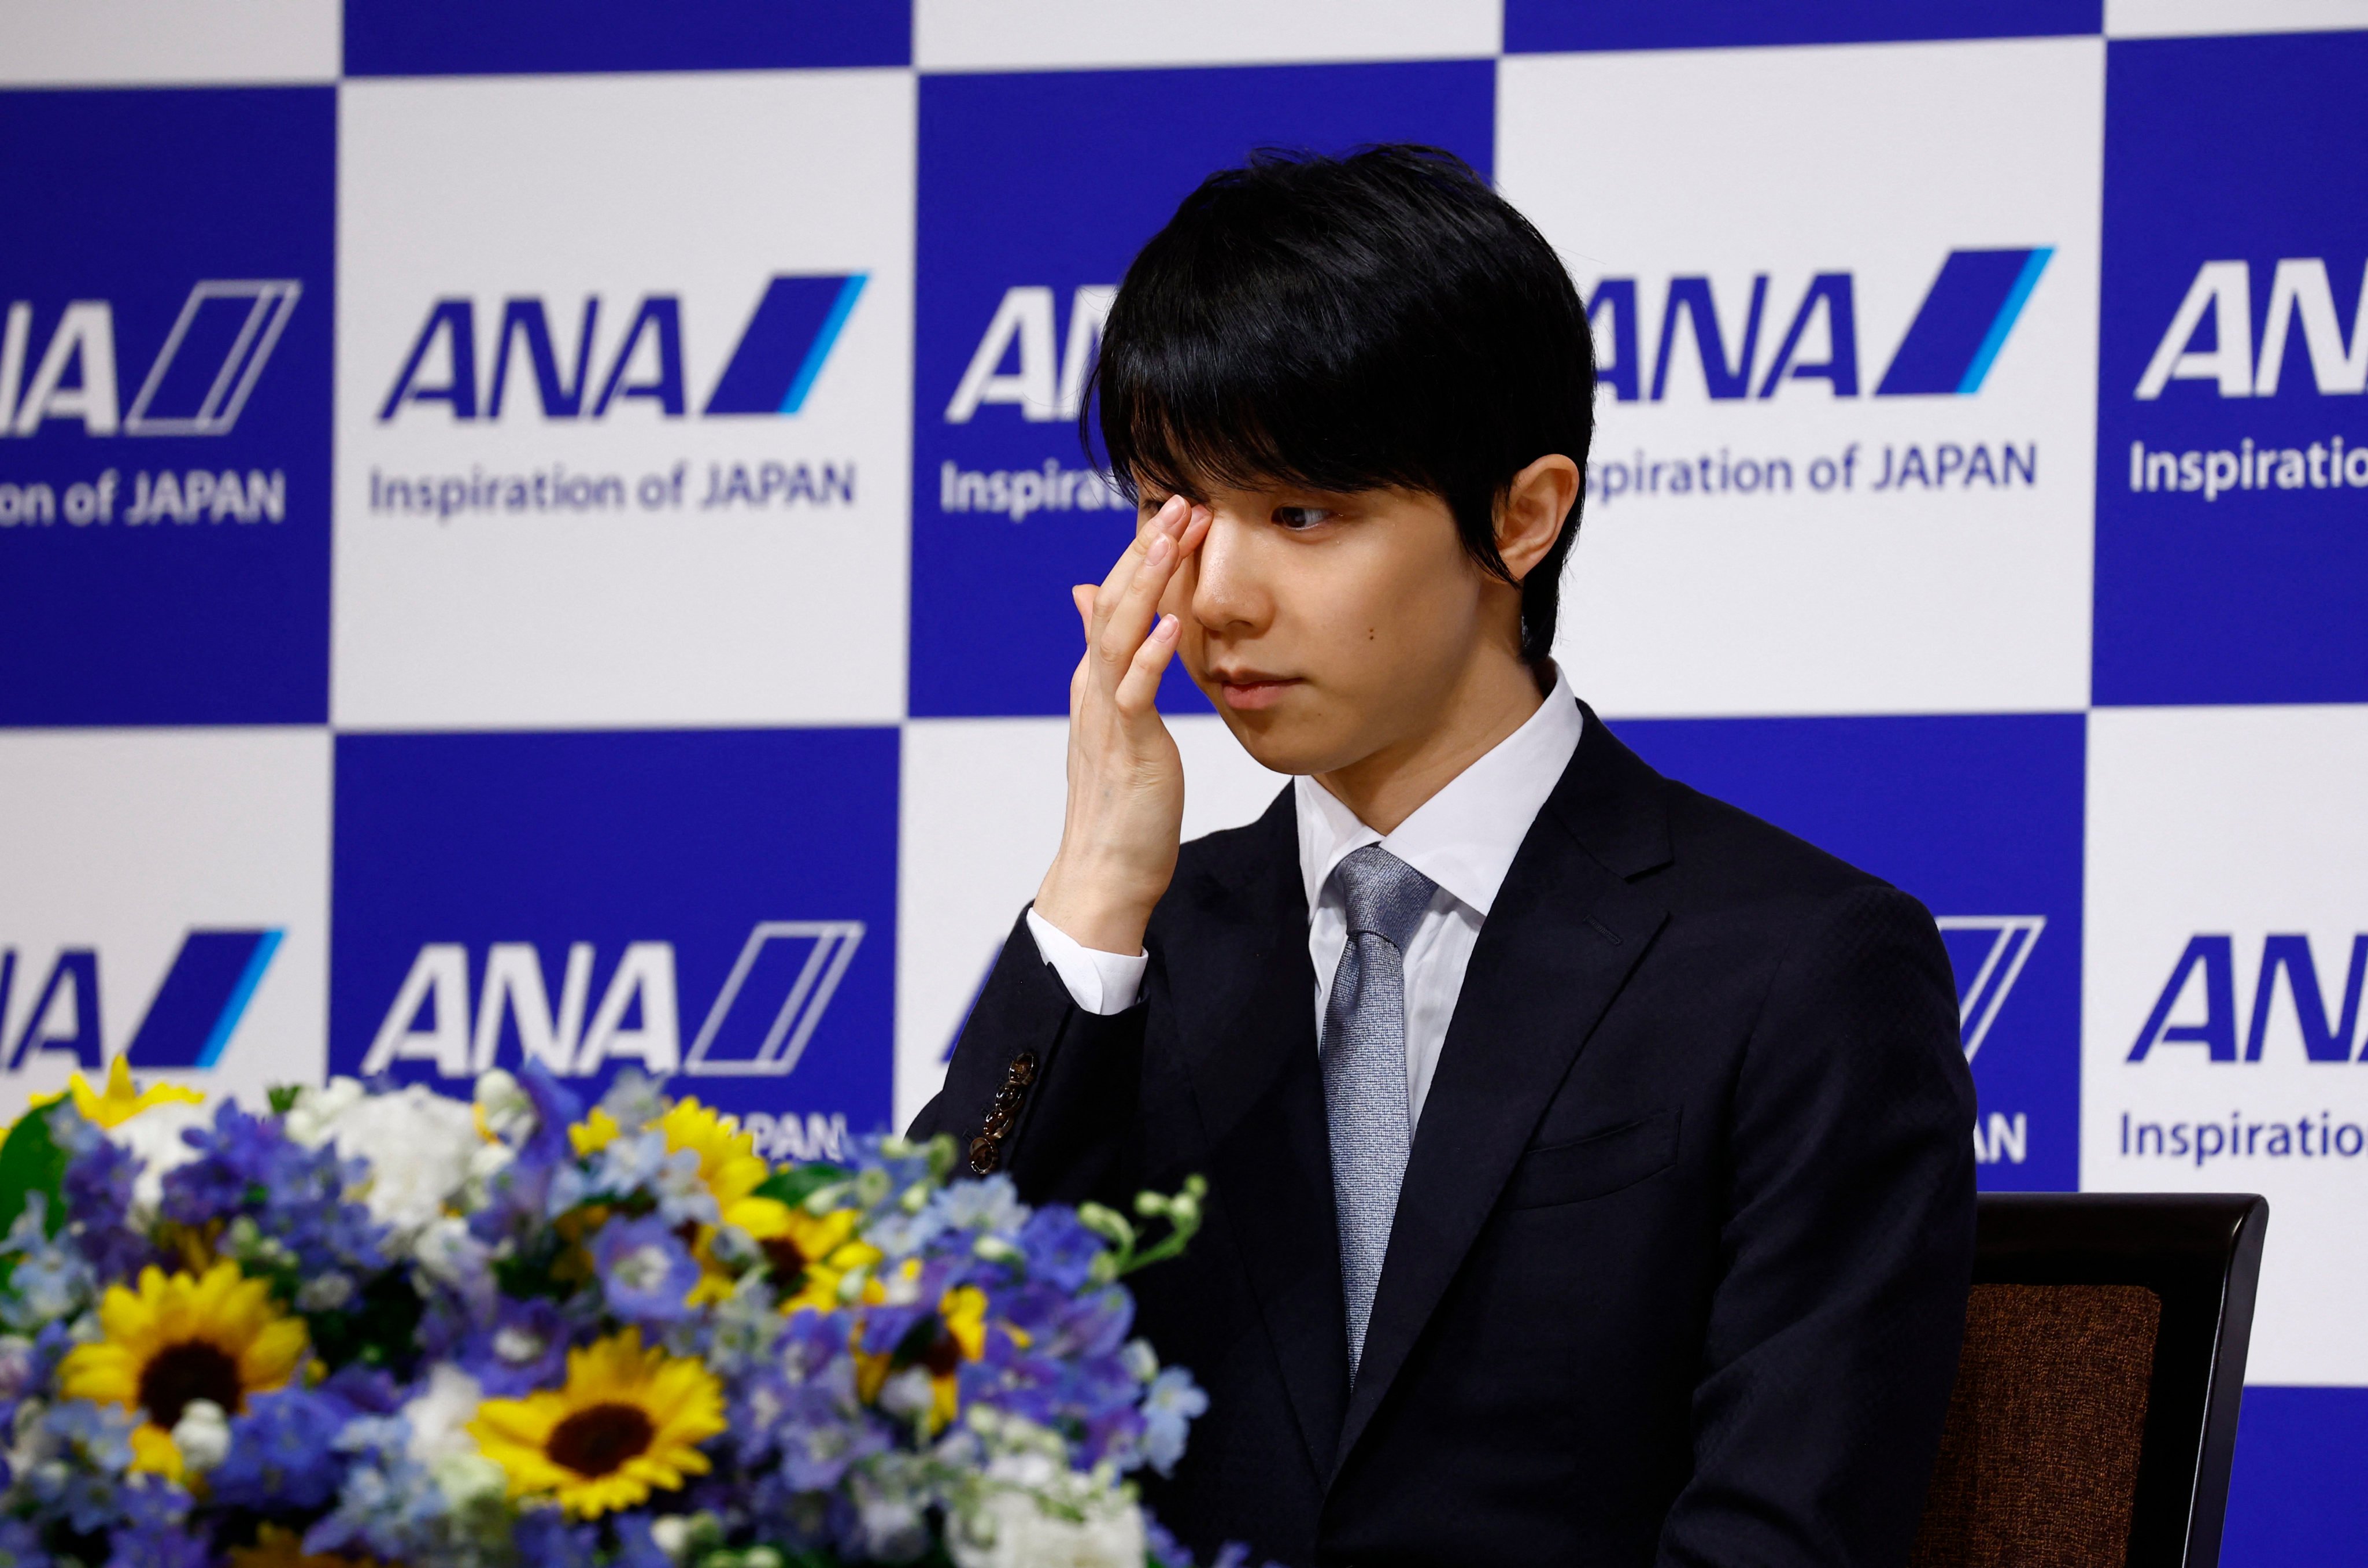 Japanese figure skater Yuzuru Hanyu holds a press conference in Tokyo on July 19, 2022 to announce his retirement. Photo: Reuters